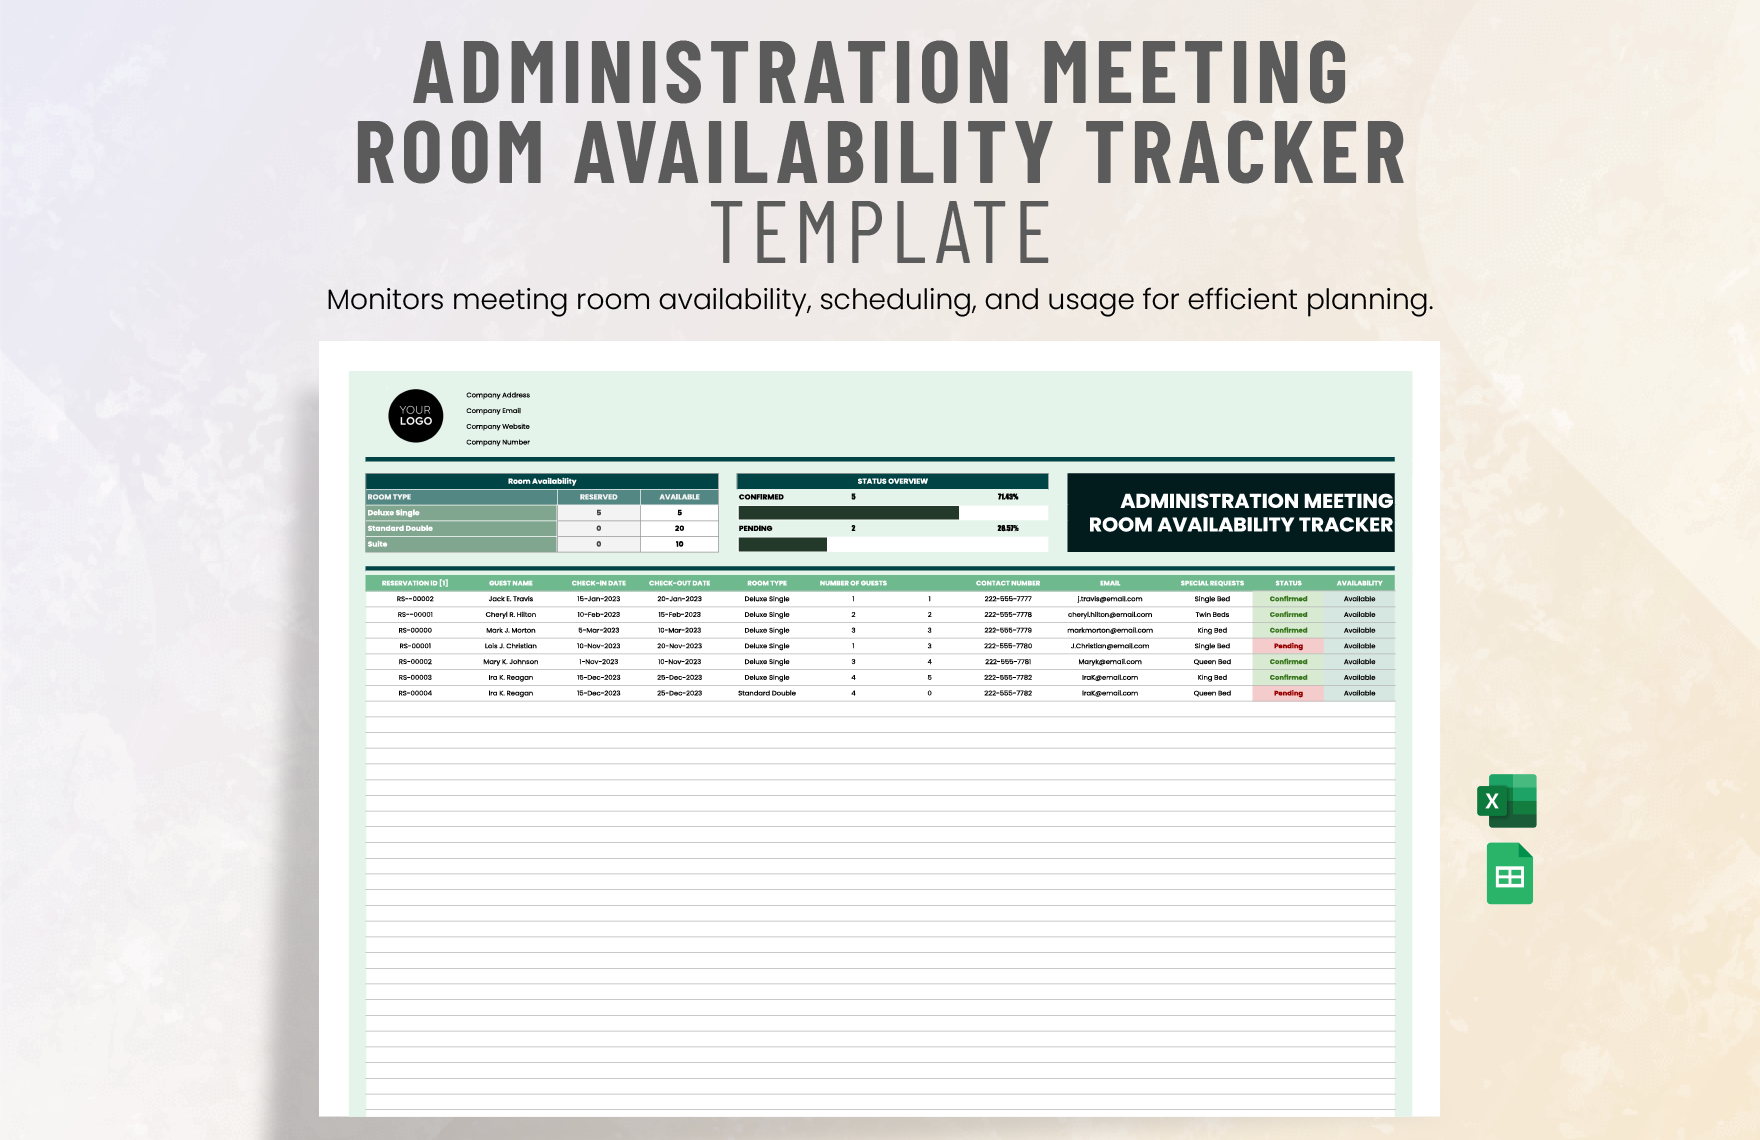 Administration Meeting Room Availability Tracker Template in Excel, Google Sheets